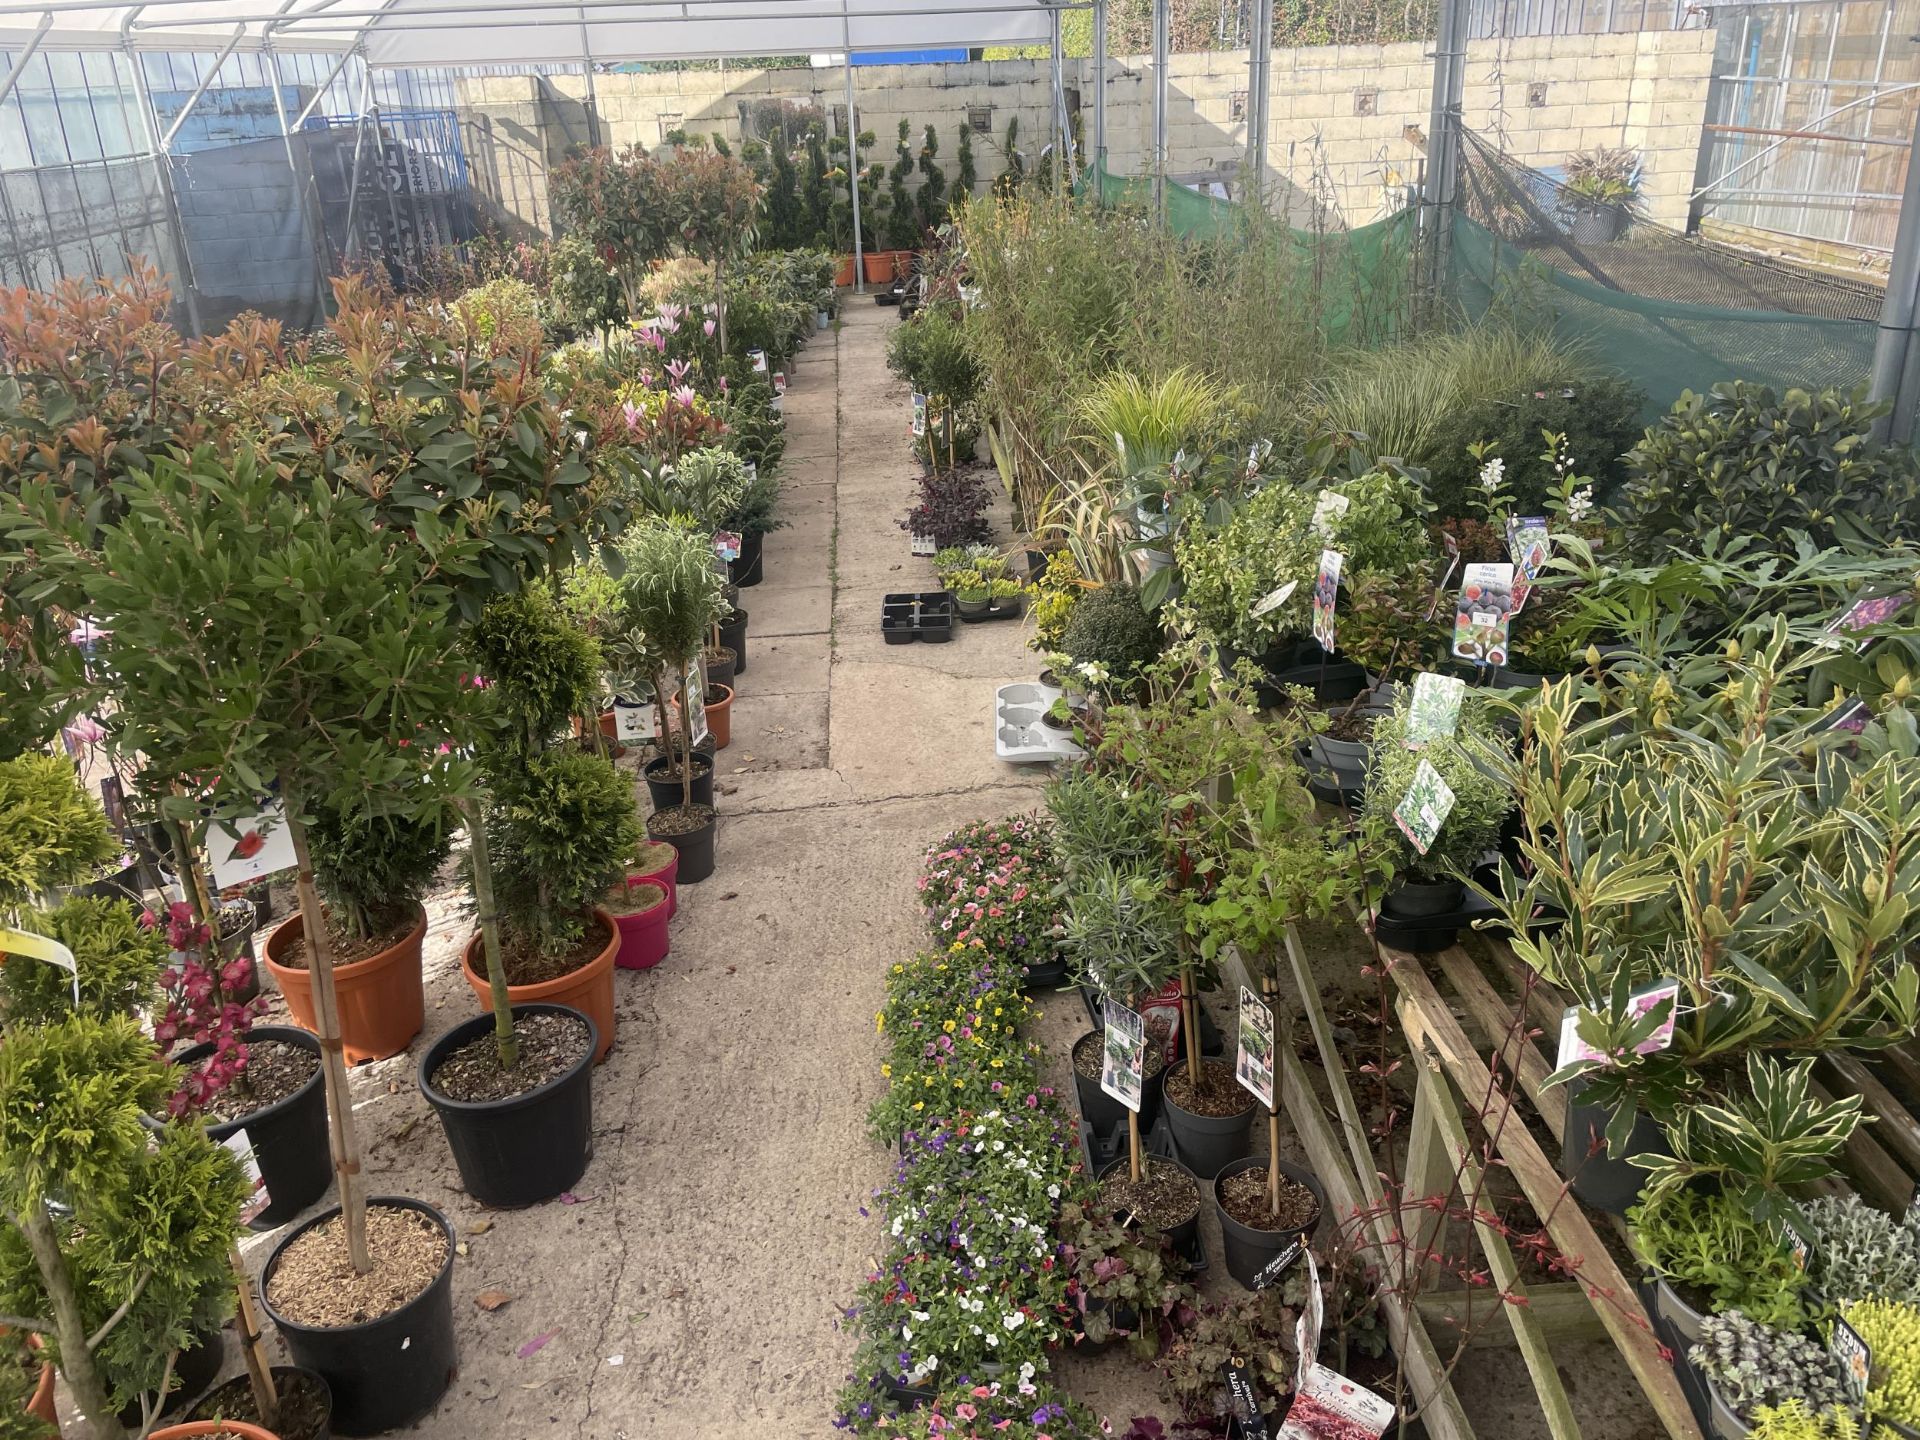 WELCOME TO ASHLEY WALLER HORTICULTURE AUCTION - LOTS ARE BEING ADDED DAILY - THE IMAGES SHOW LOTS - Image 9 of 59